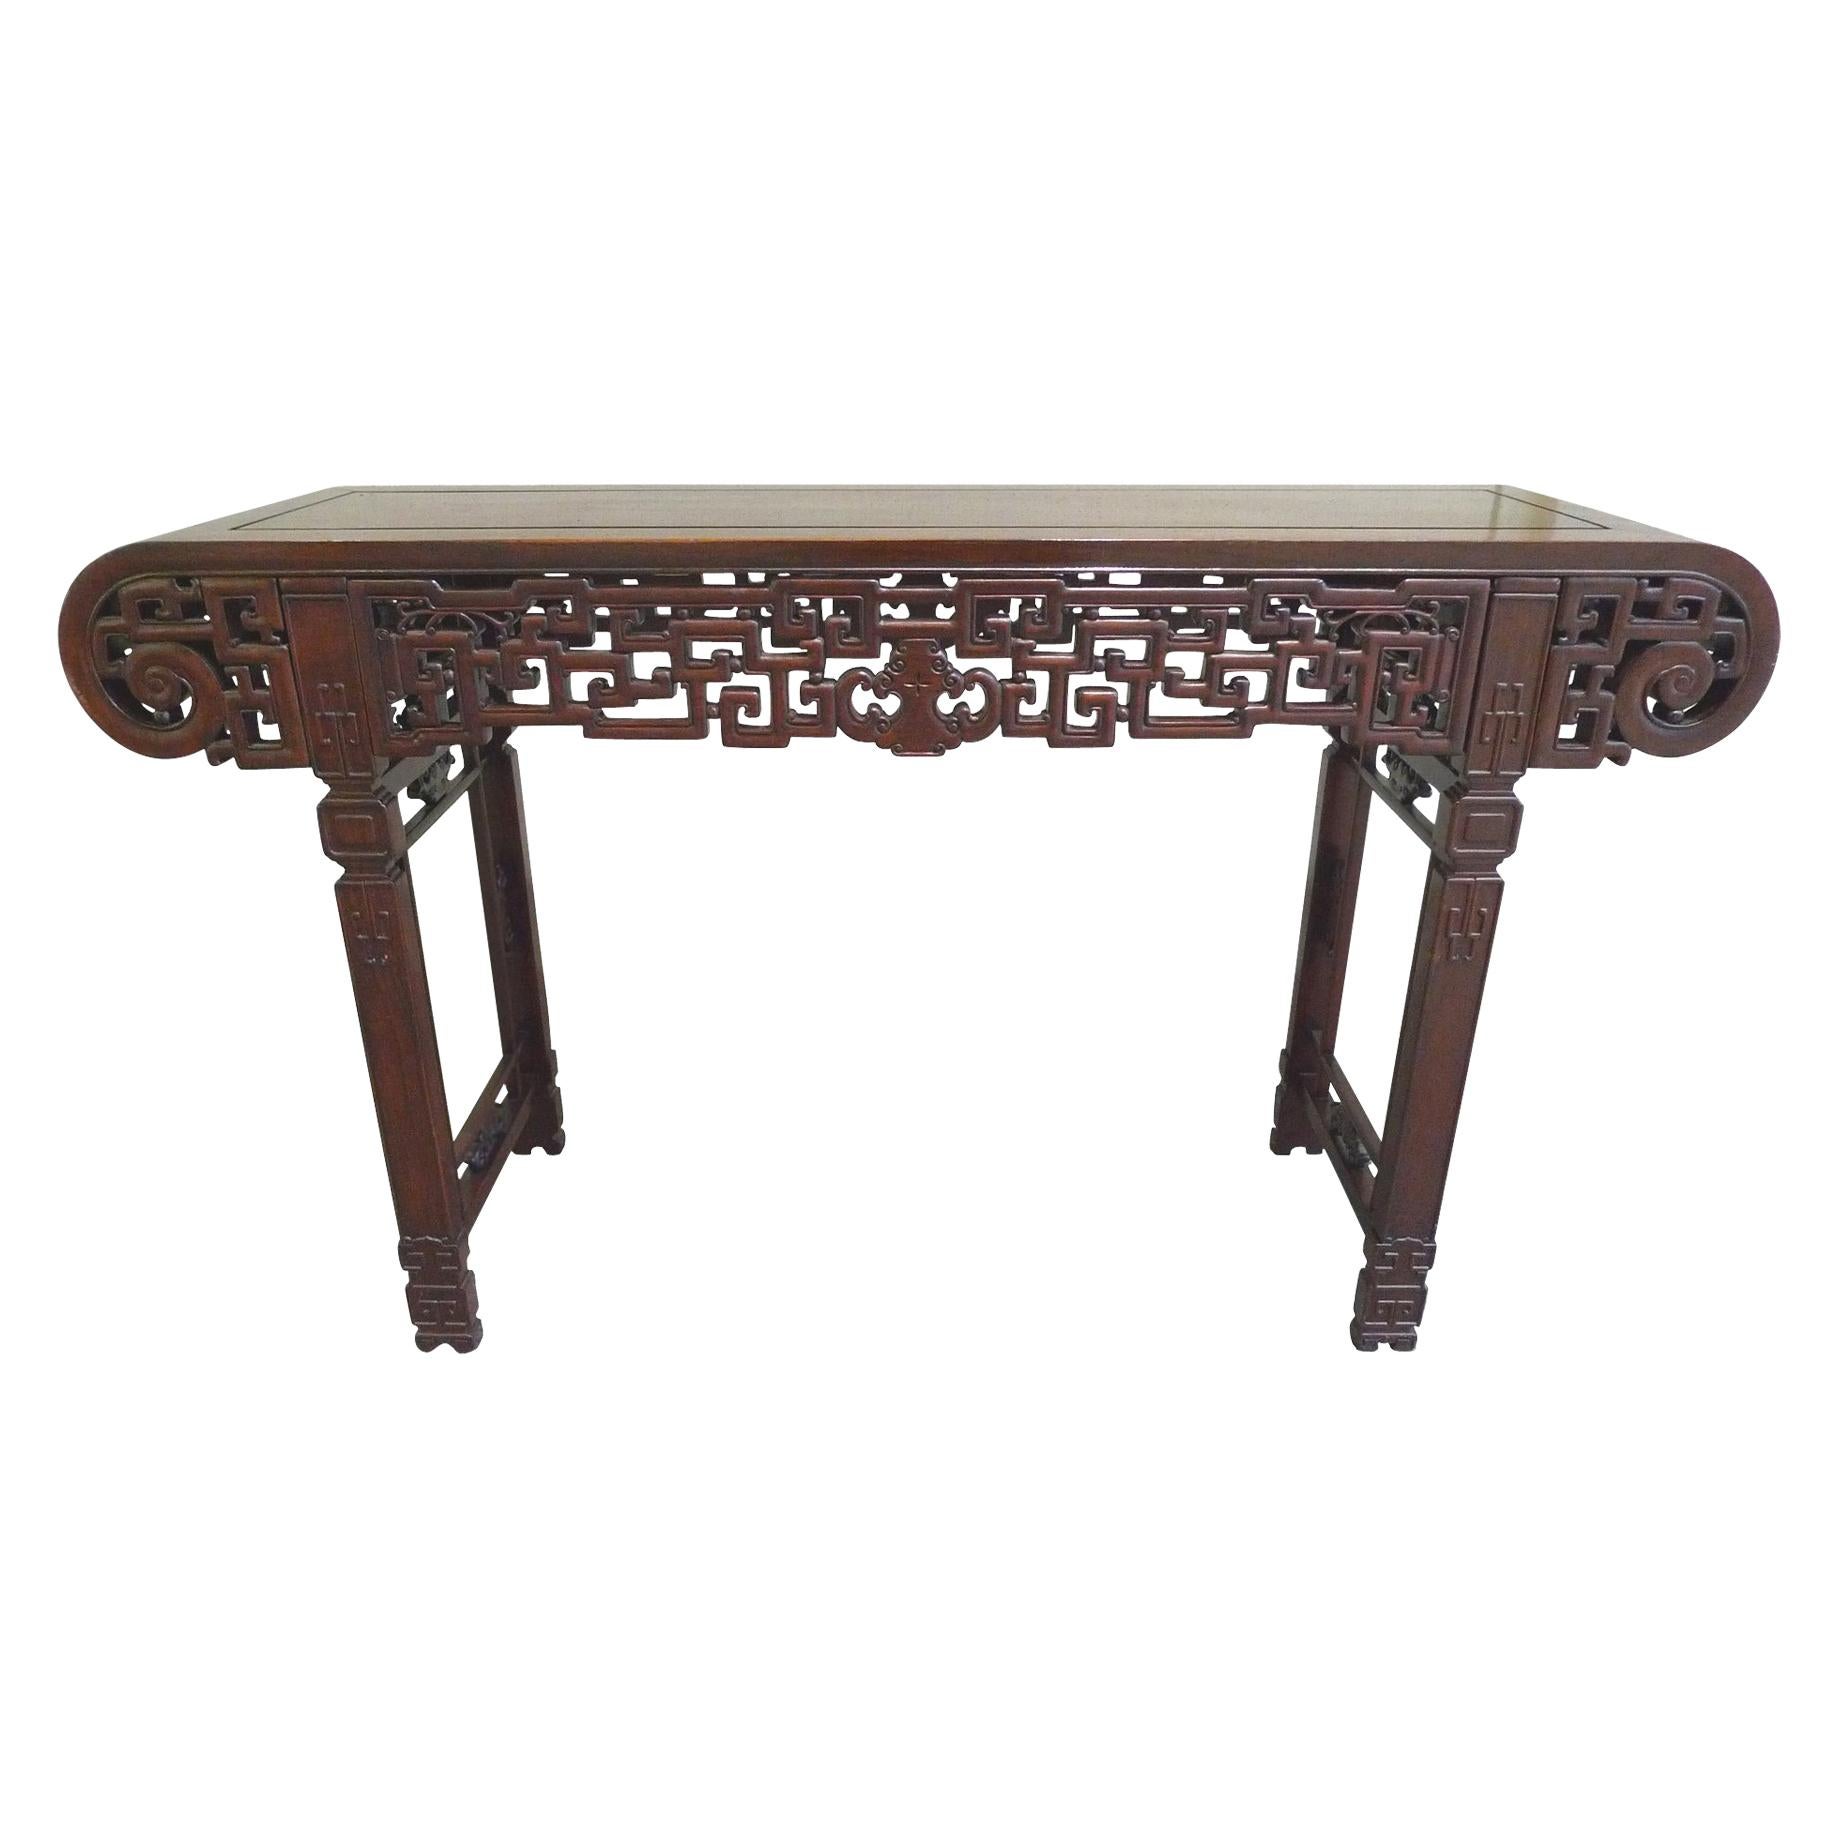 20th Century Refinished Elmwood Asian Altar Table